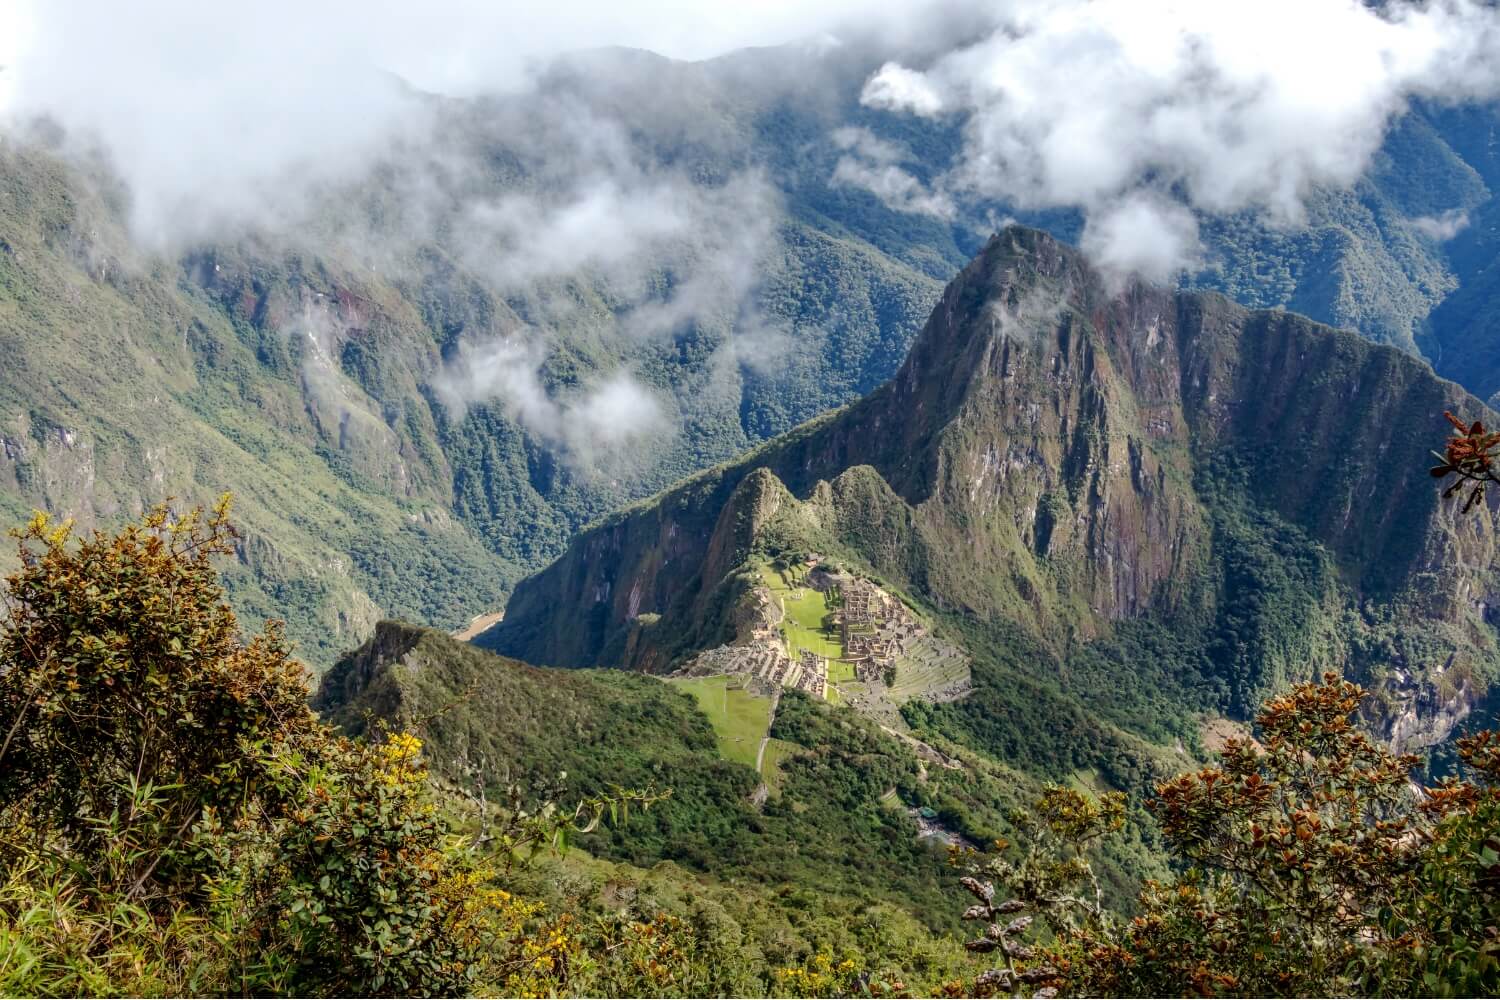  10 DAYS IN PERU: THE PERFECT ITINERARY FOR ADVENTURERS